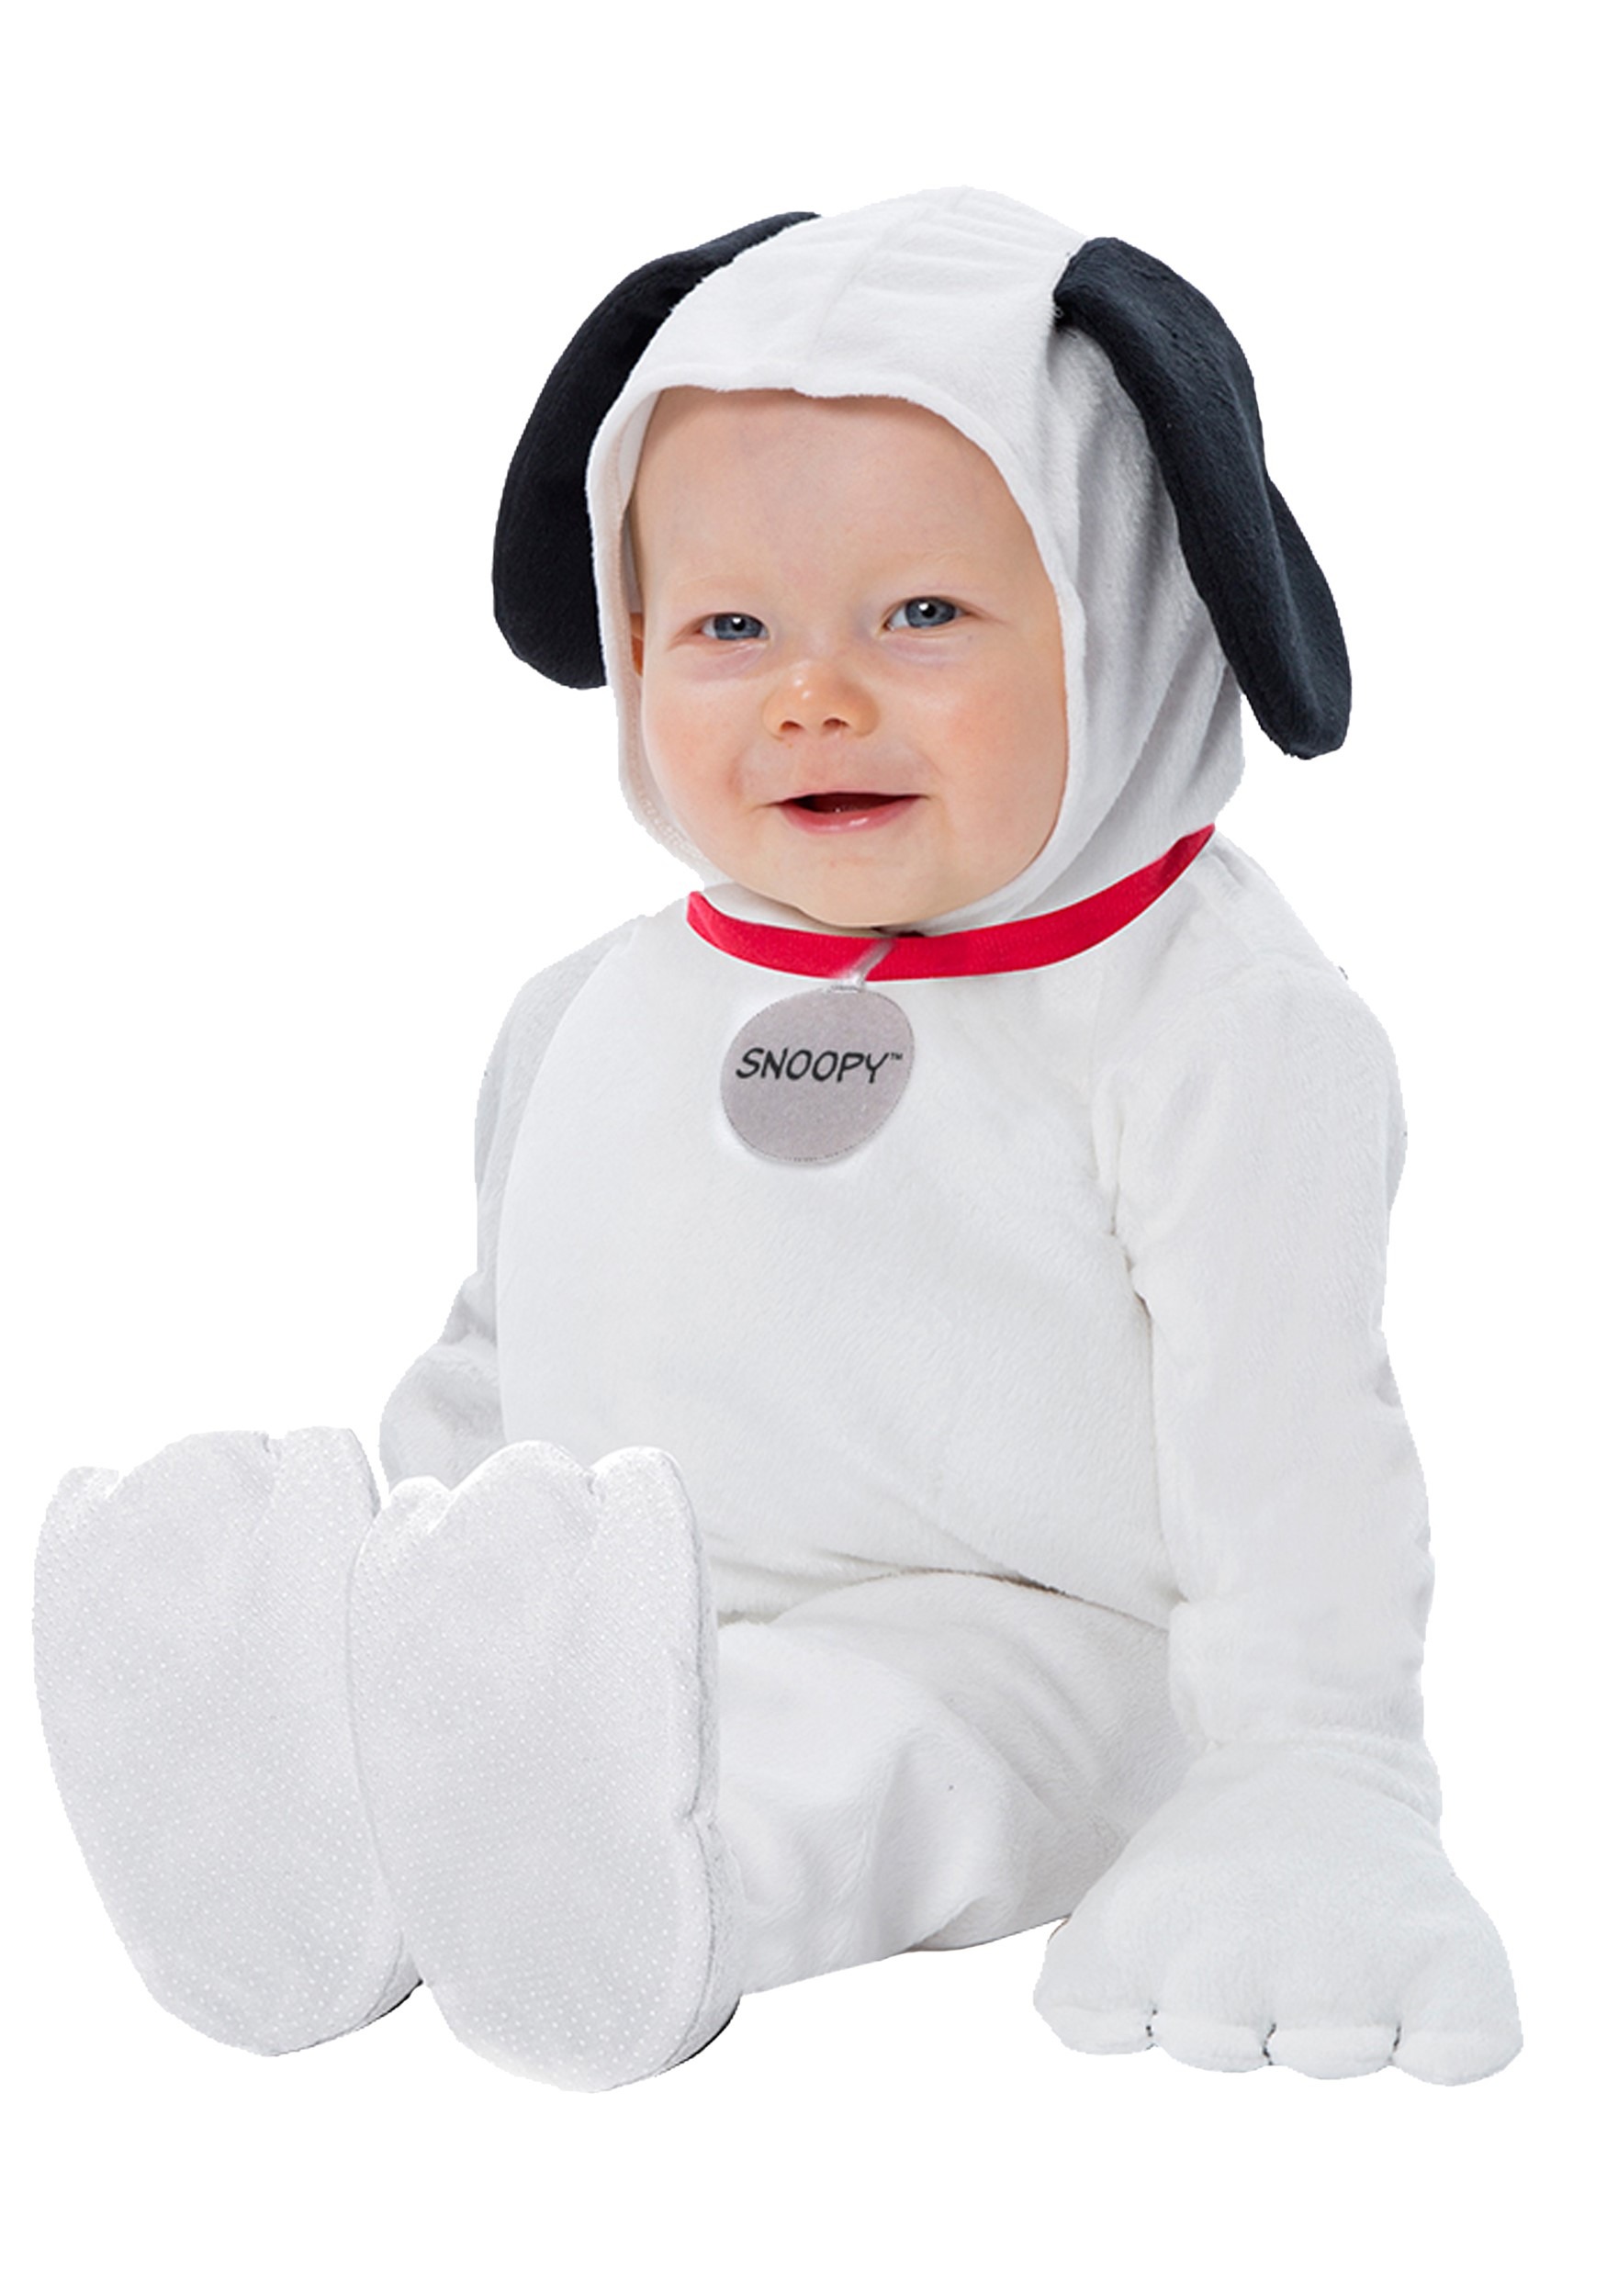 Peanuts Snoopy Costume for Infants